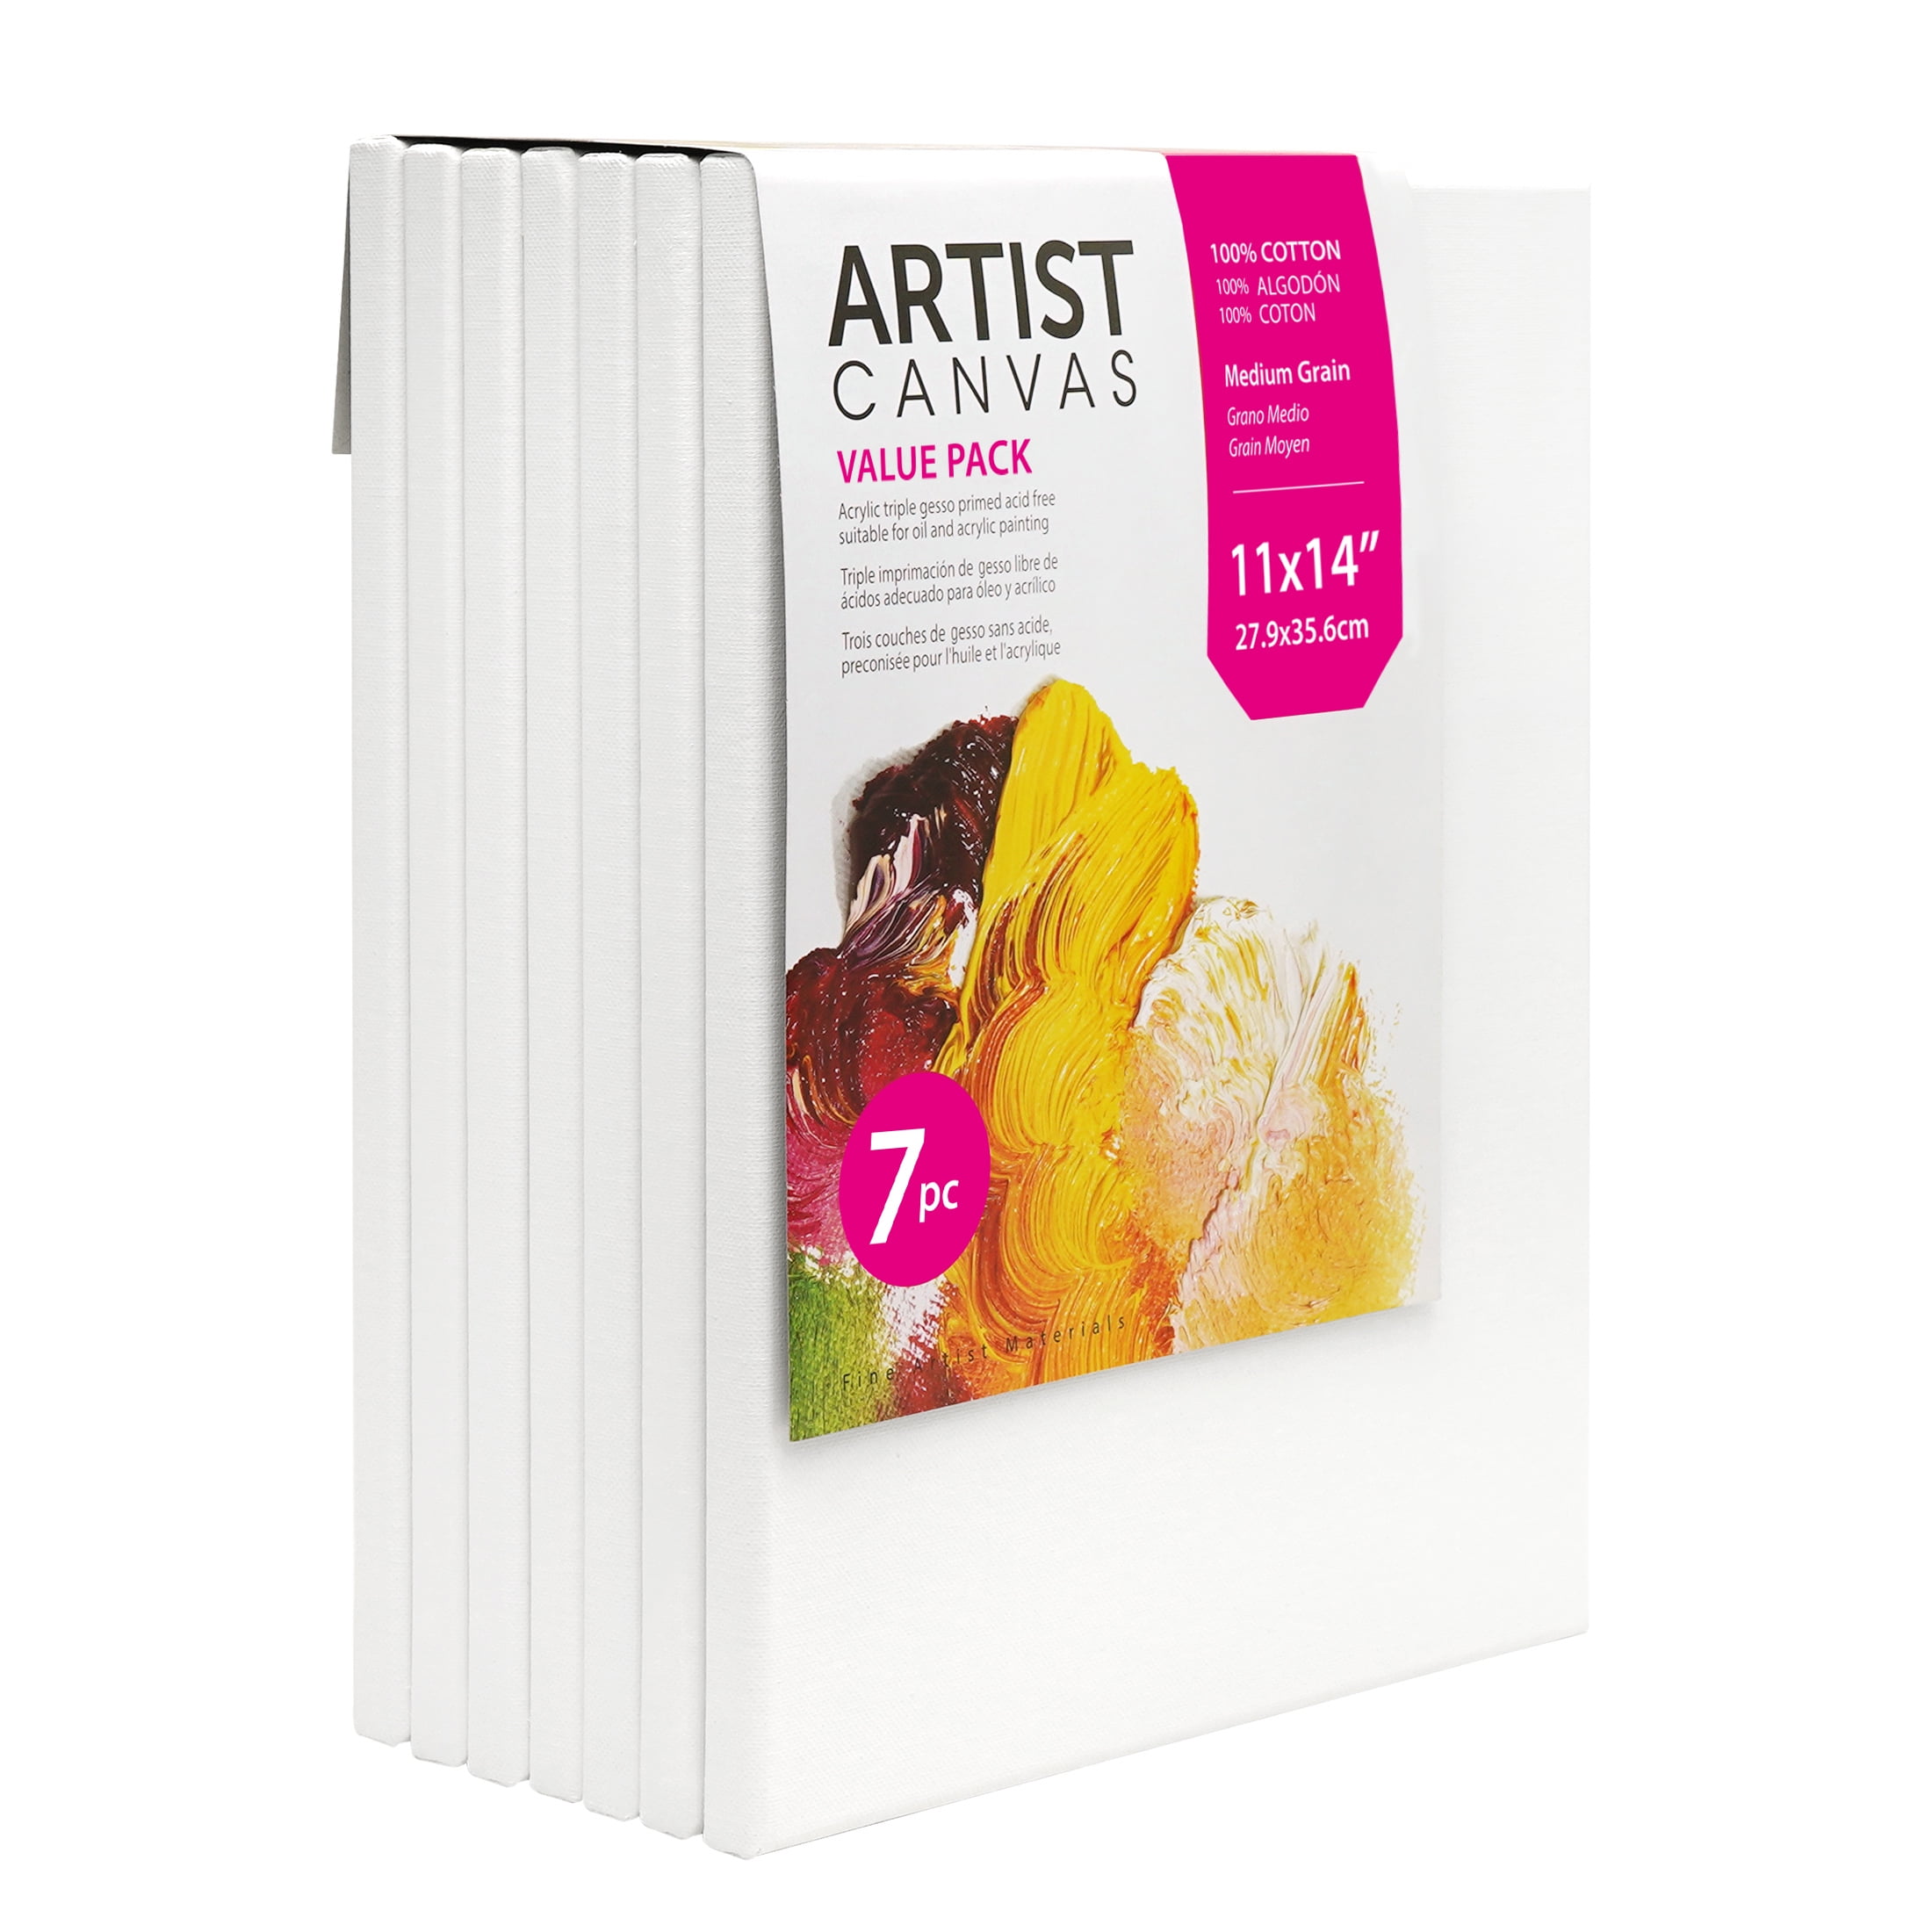 11 x 14 Stretched Super Value Pack Cotton Canvas 7pk - Stretched Canvas - Art Supplies & Painting